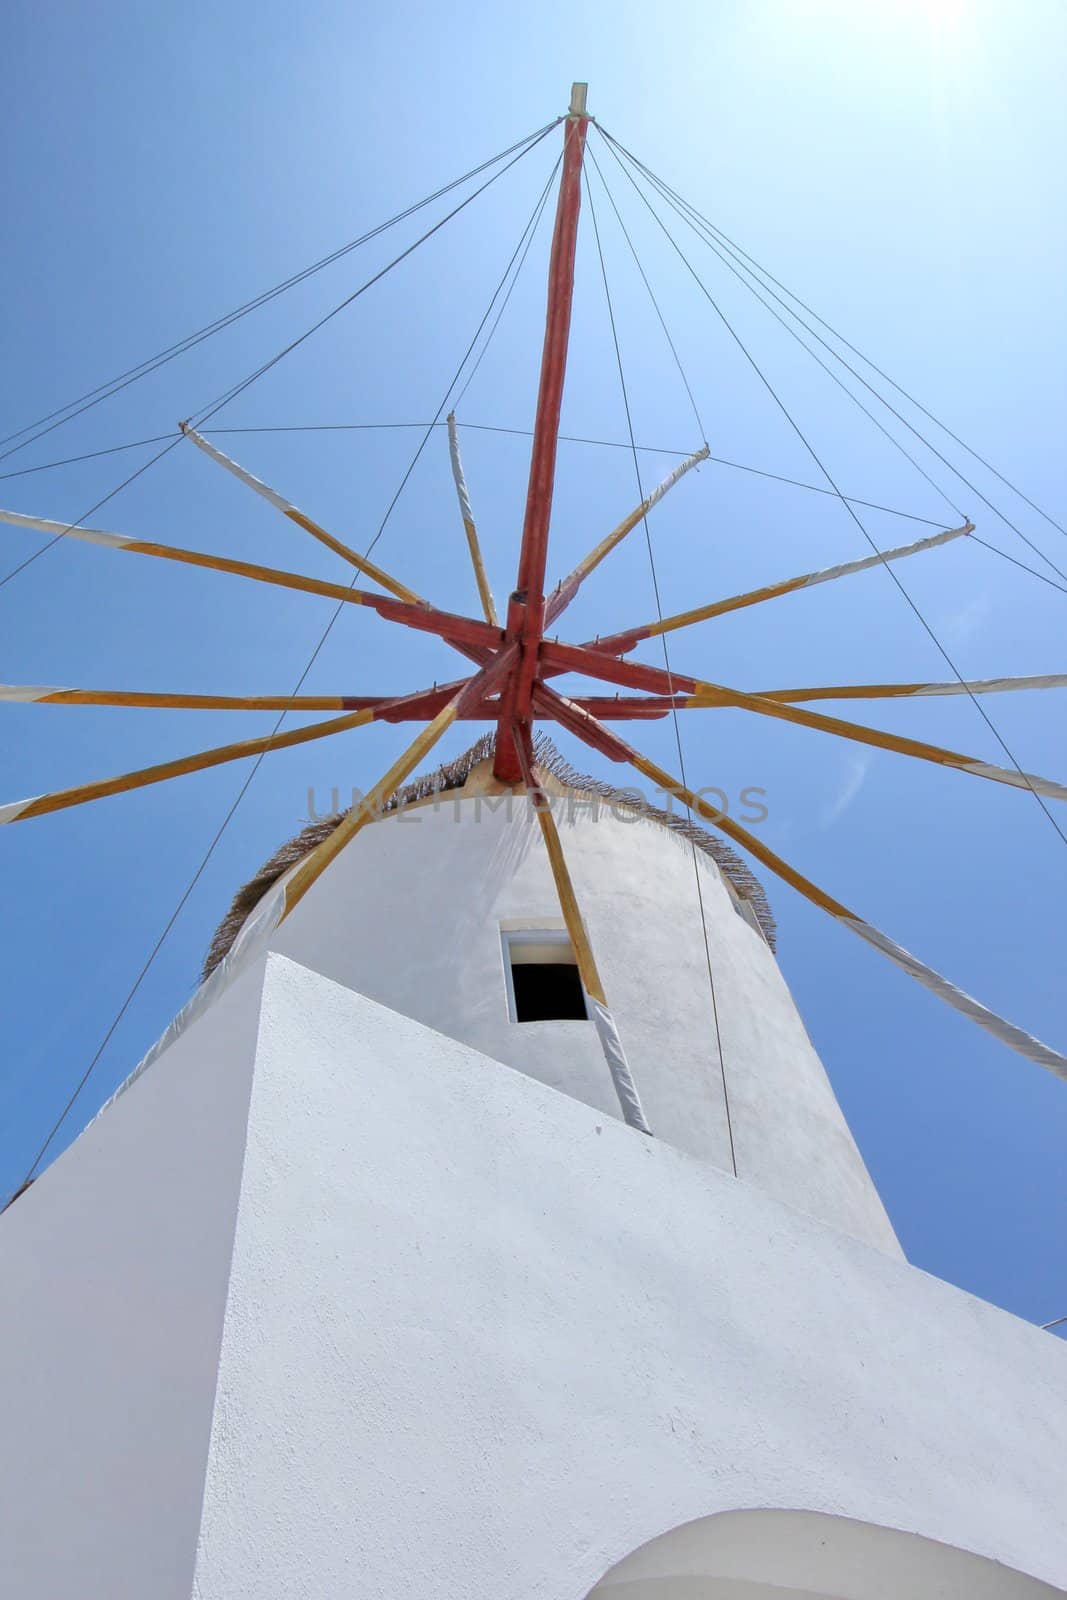 Famous old windmill at Oia, Santorini island, Greece, by sunny day